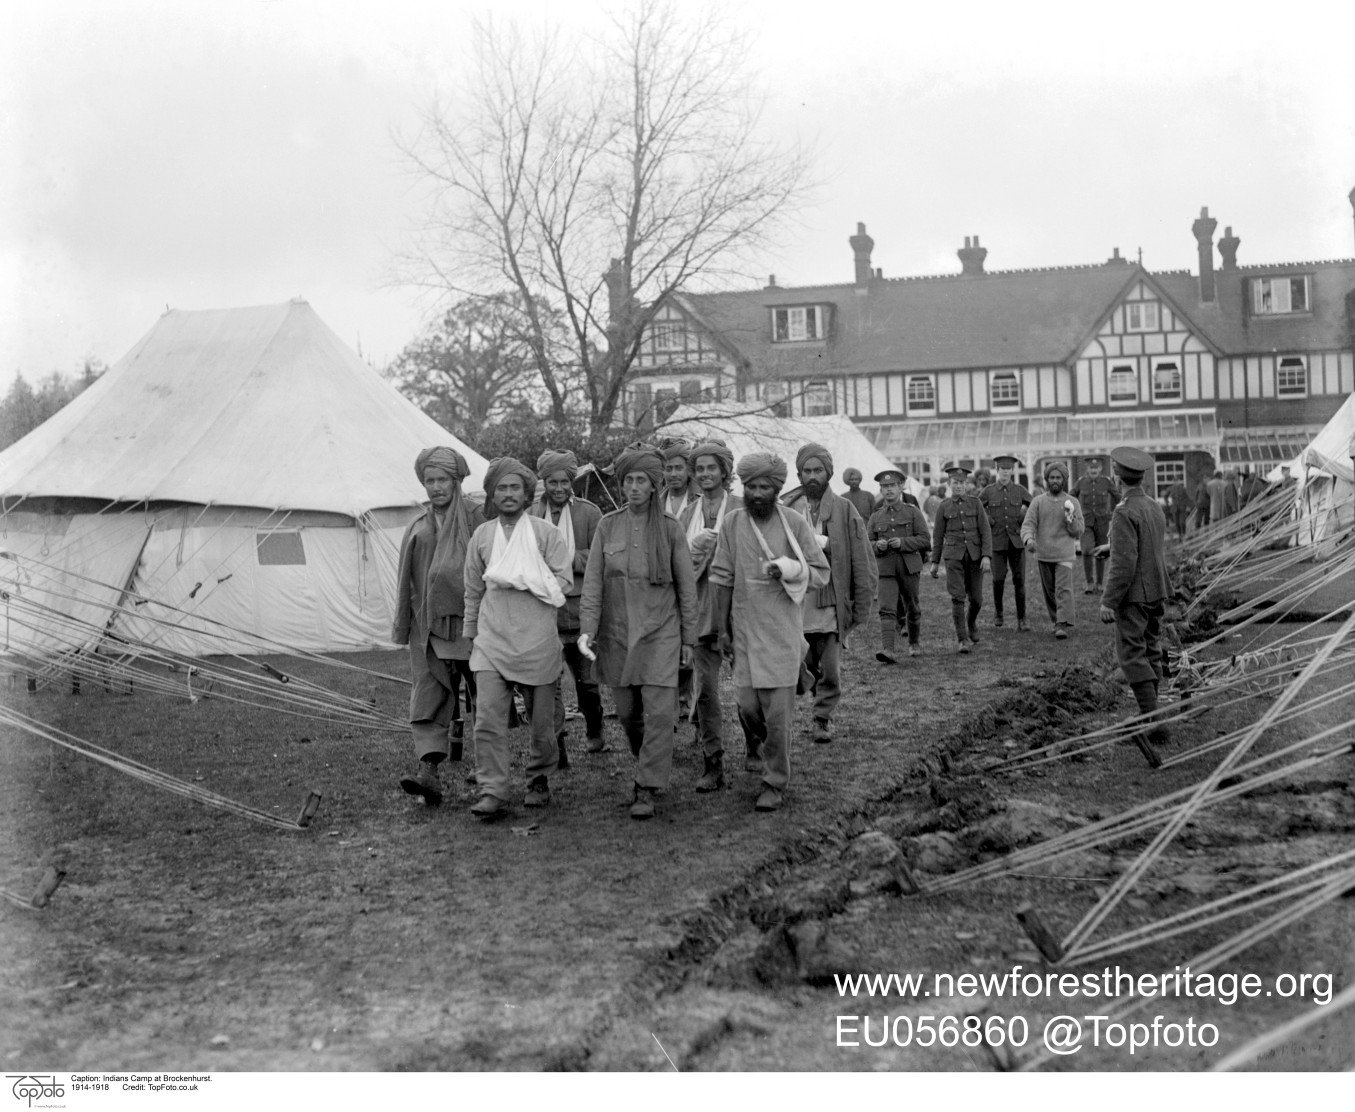 Indian patients returning to tented accommodation in grounds of Forest Park Hotel, The Lady Hardinge Hospital for Wounded Indian Soldiers, Brockenhurst. 1914